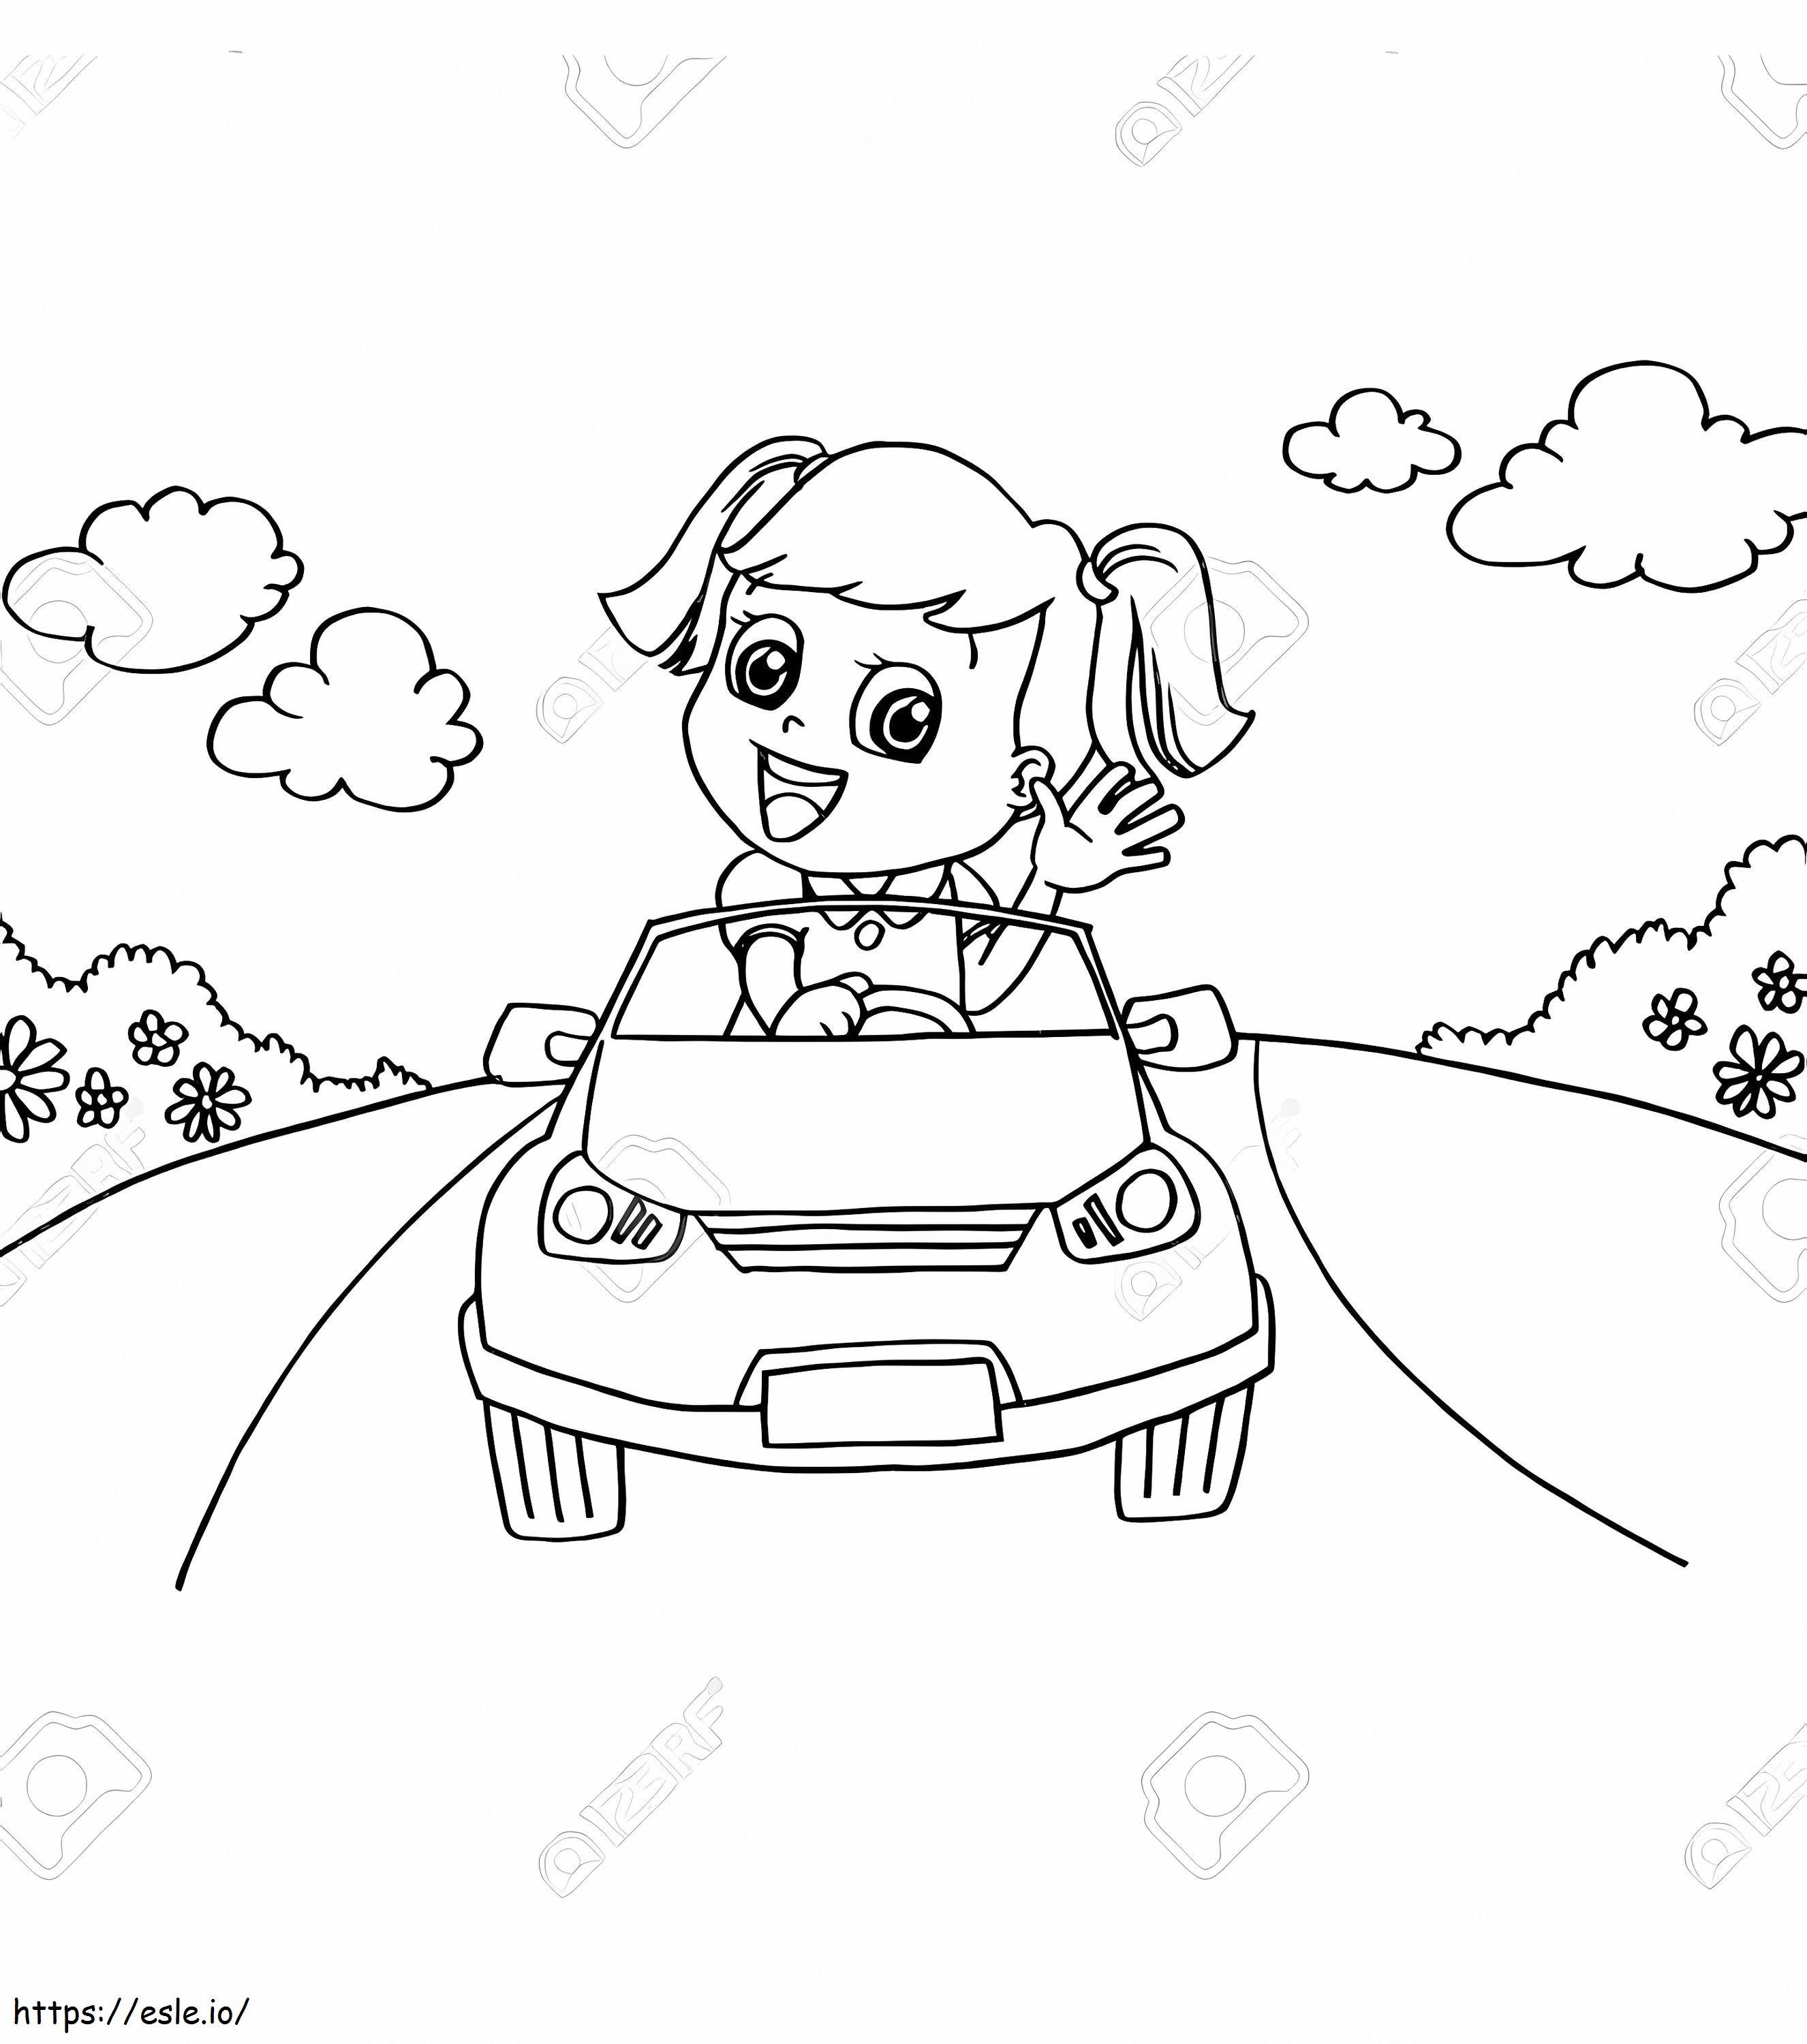 Image Of Little Girl Driving A Toy Car Vector coloring page